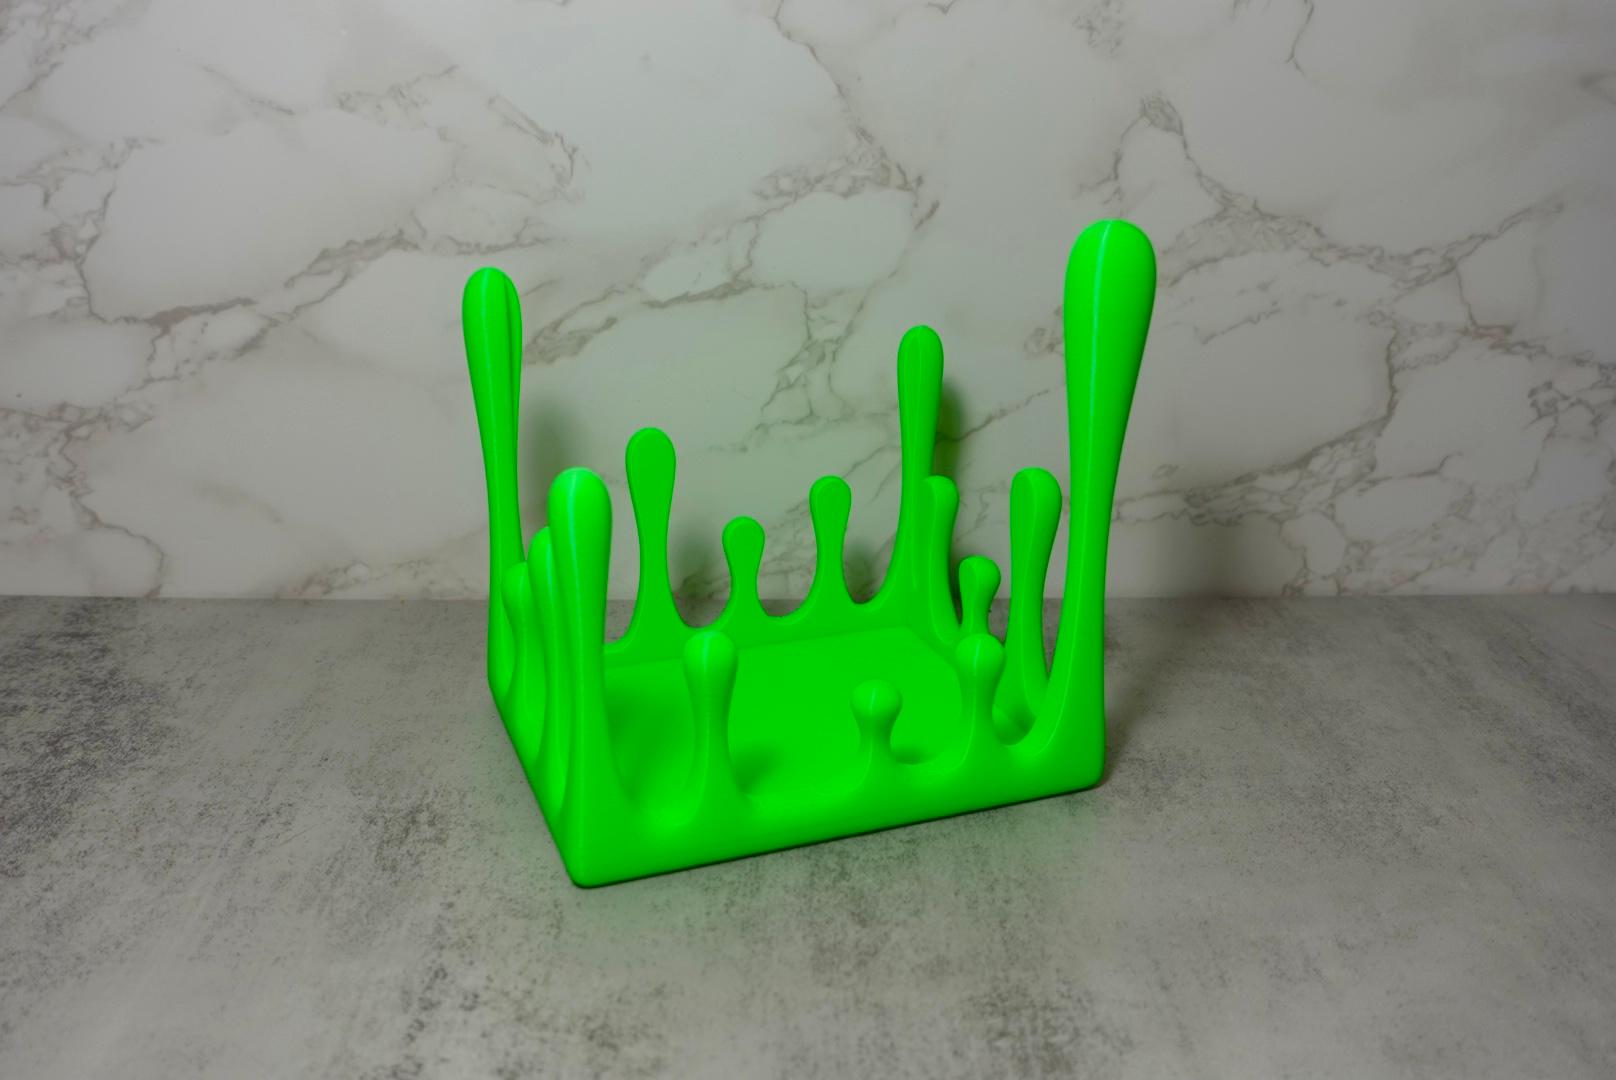 Dripping Slime for Collectibles (3.5 x 4.5 x 6.25-inch Product Box) 3d model